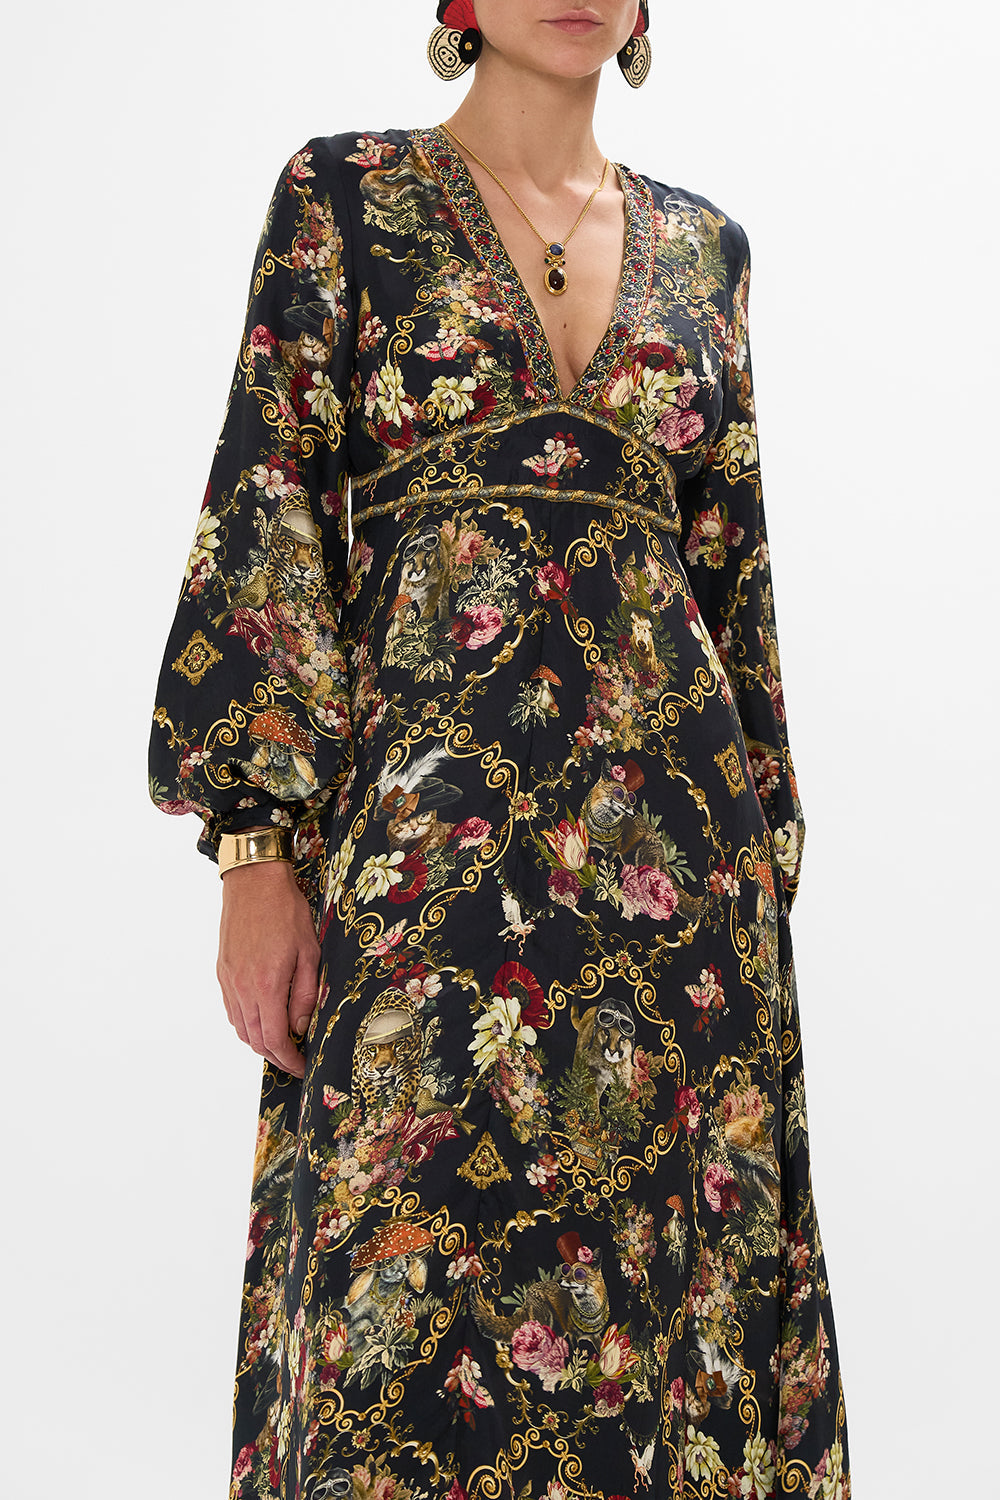 LANTERN SLEEVE DRESS TOLD IN THE TAPESTRY